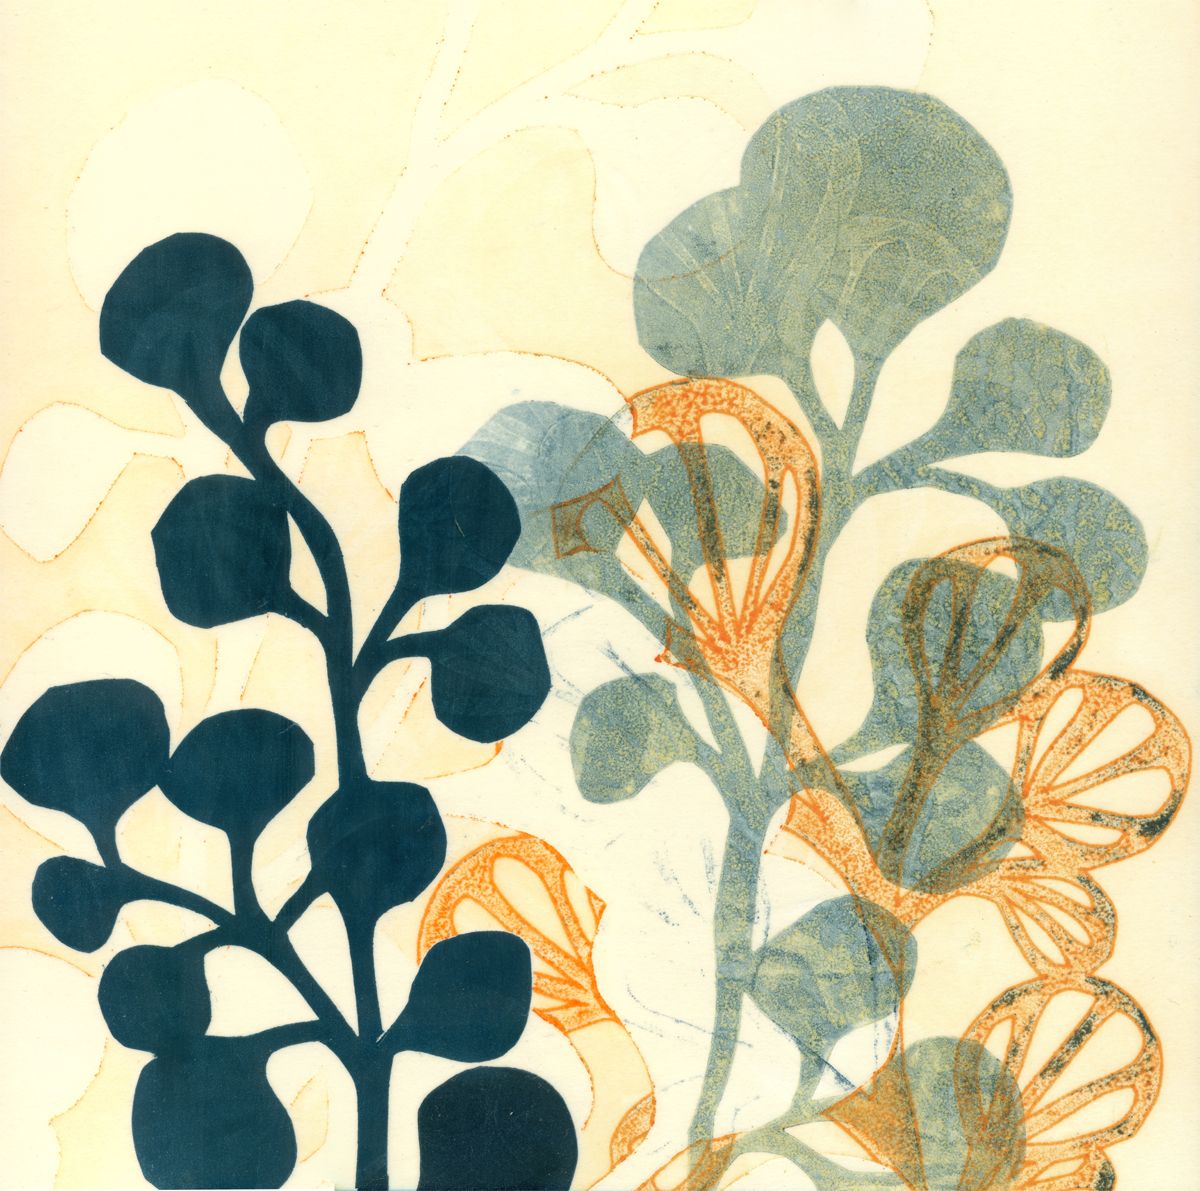 Botanical mixed media piece using drypoint, stencil and collagraph techniques with India ink